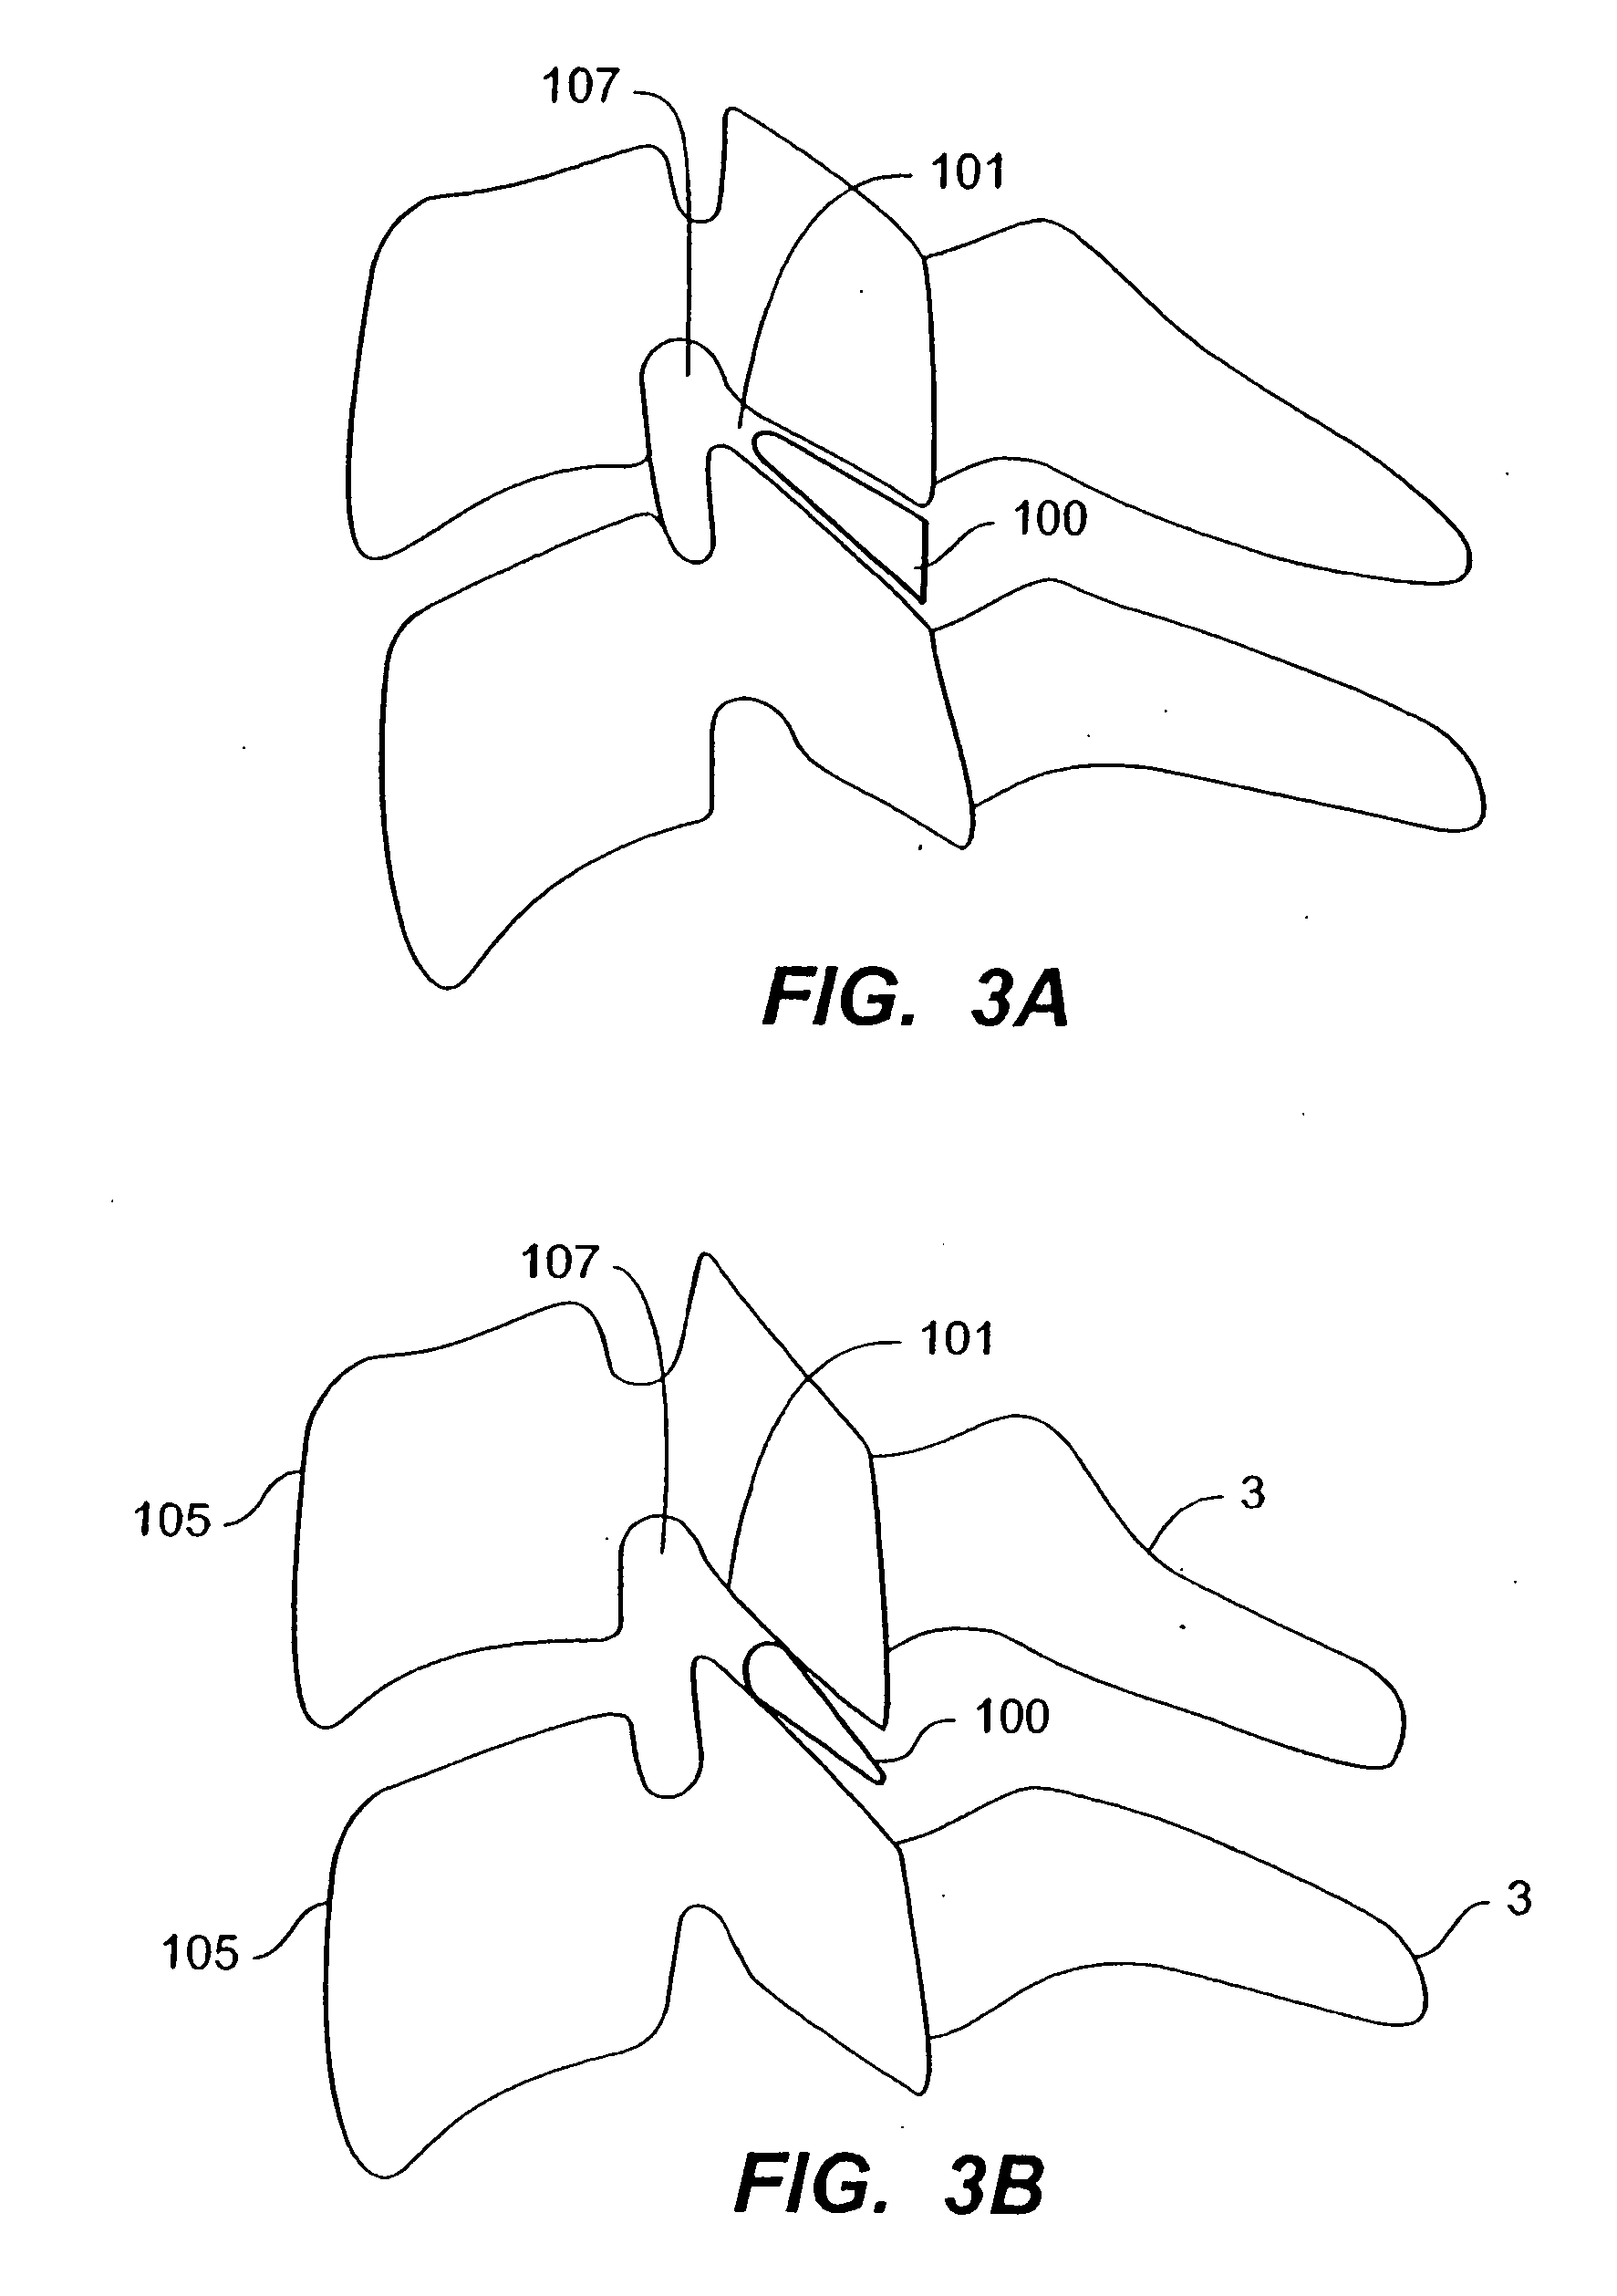 Inter-cervical facet joint implant with locking screw system